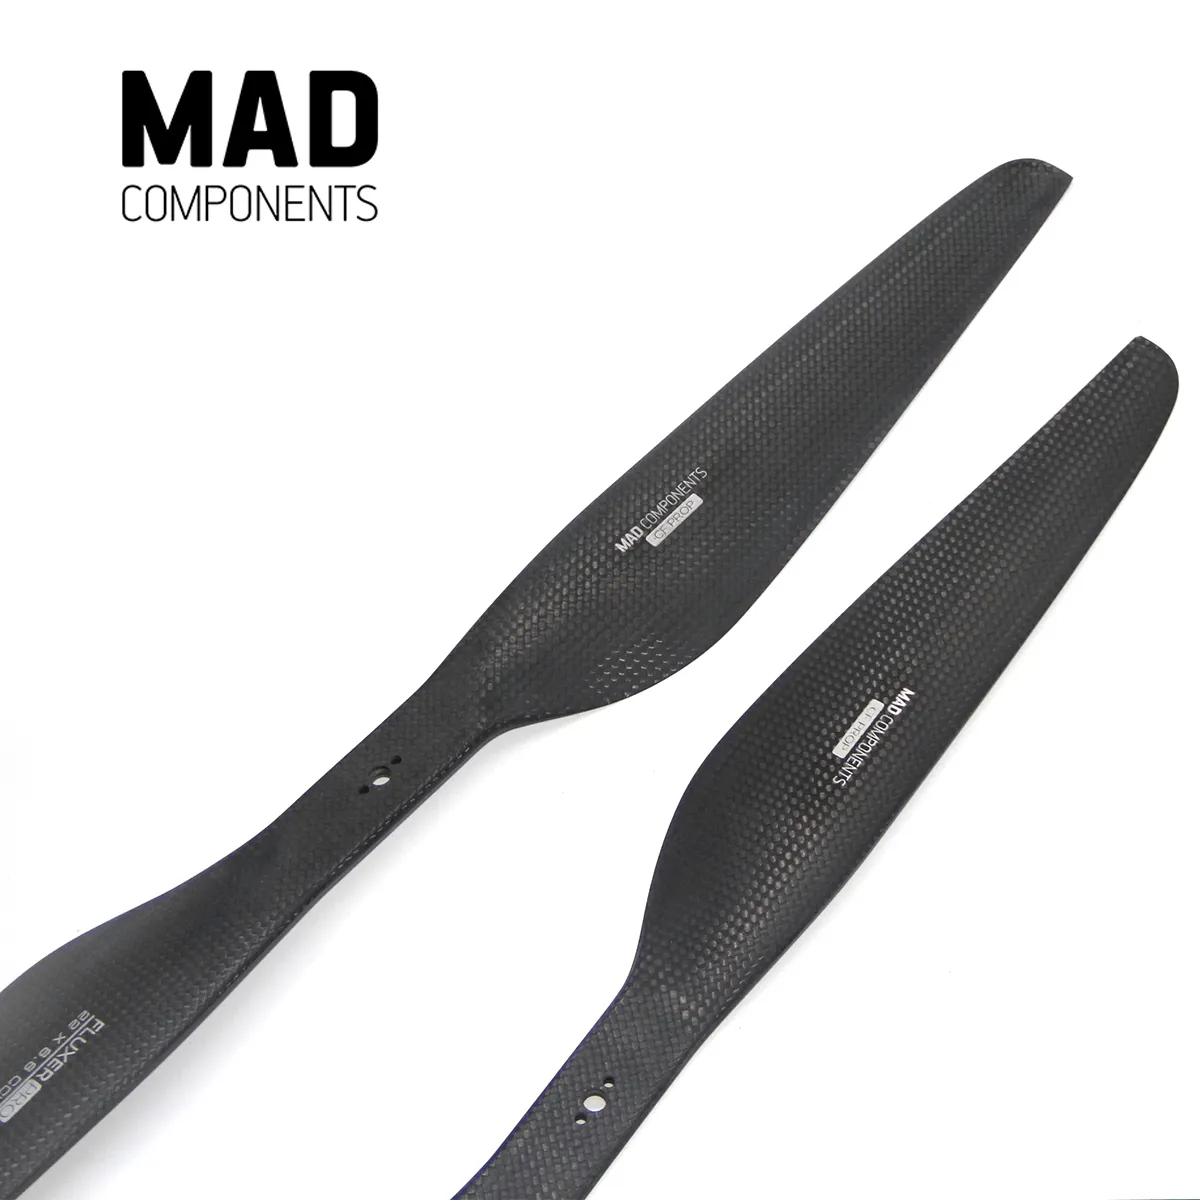 MAD FLUXER PRO 19x5.7 Inch Super Light Propeller UAV Propellers Usage For The Professional Quadcopter Drone